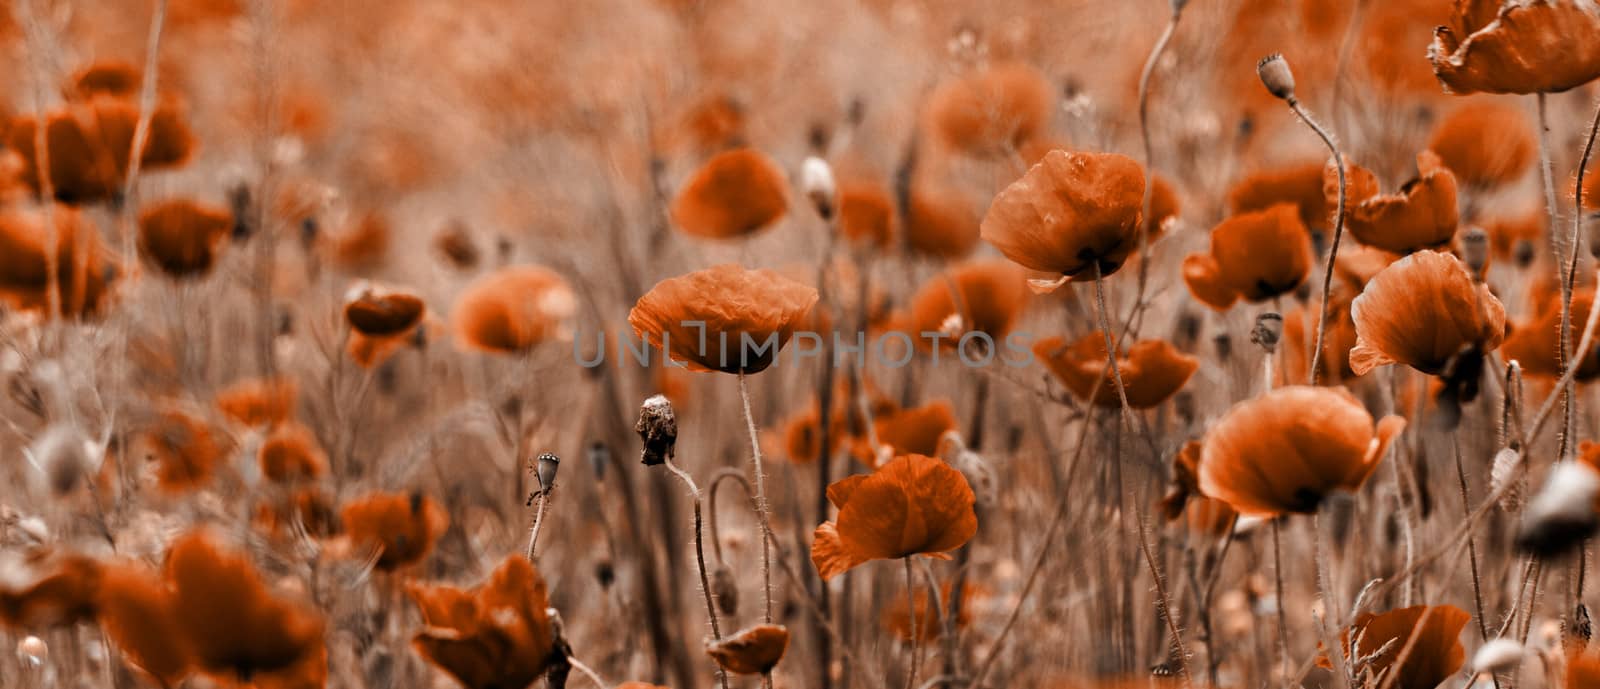 Red poppies by Nneirda